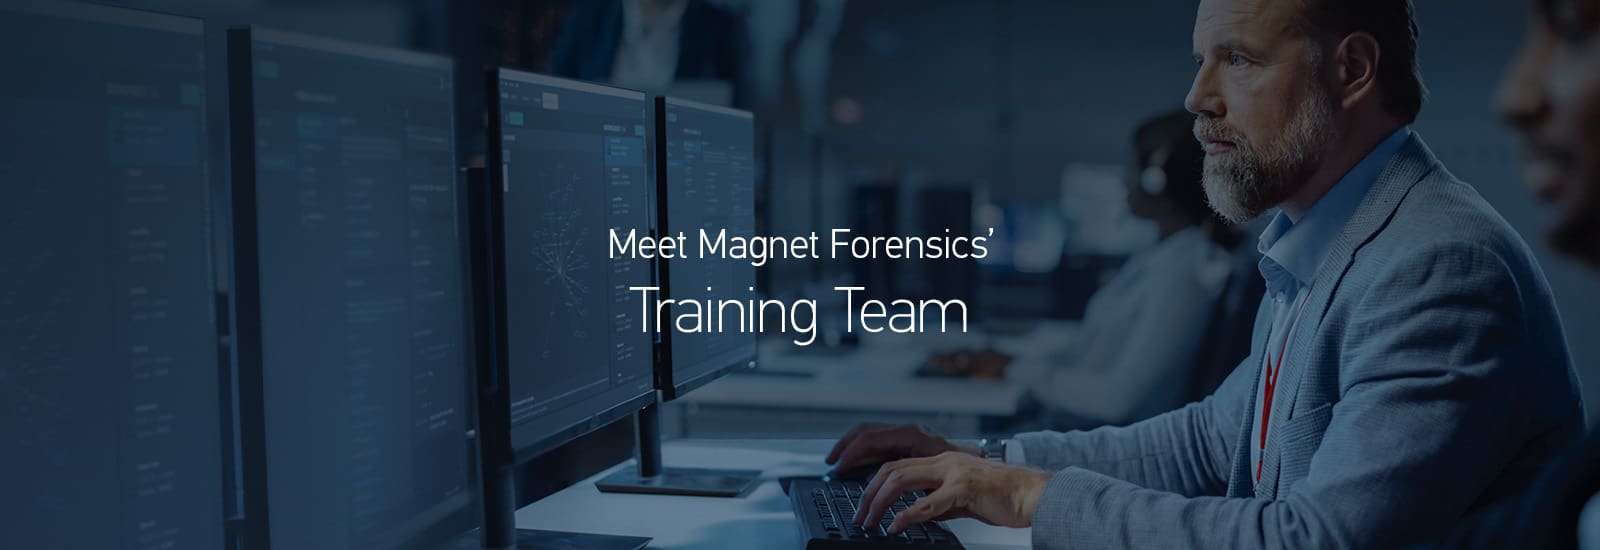 A decorative header for Meet the Magnet Forensics Training Team